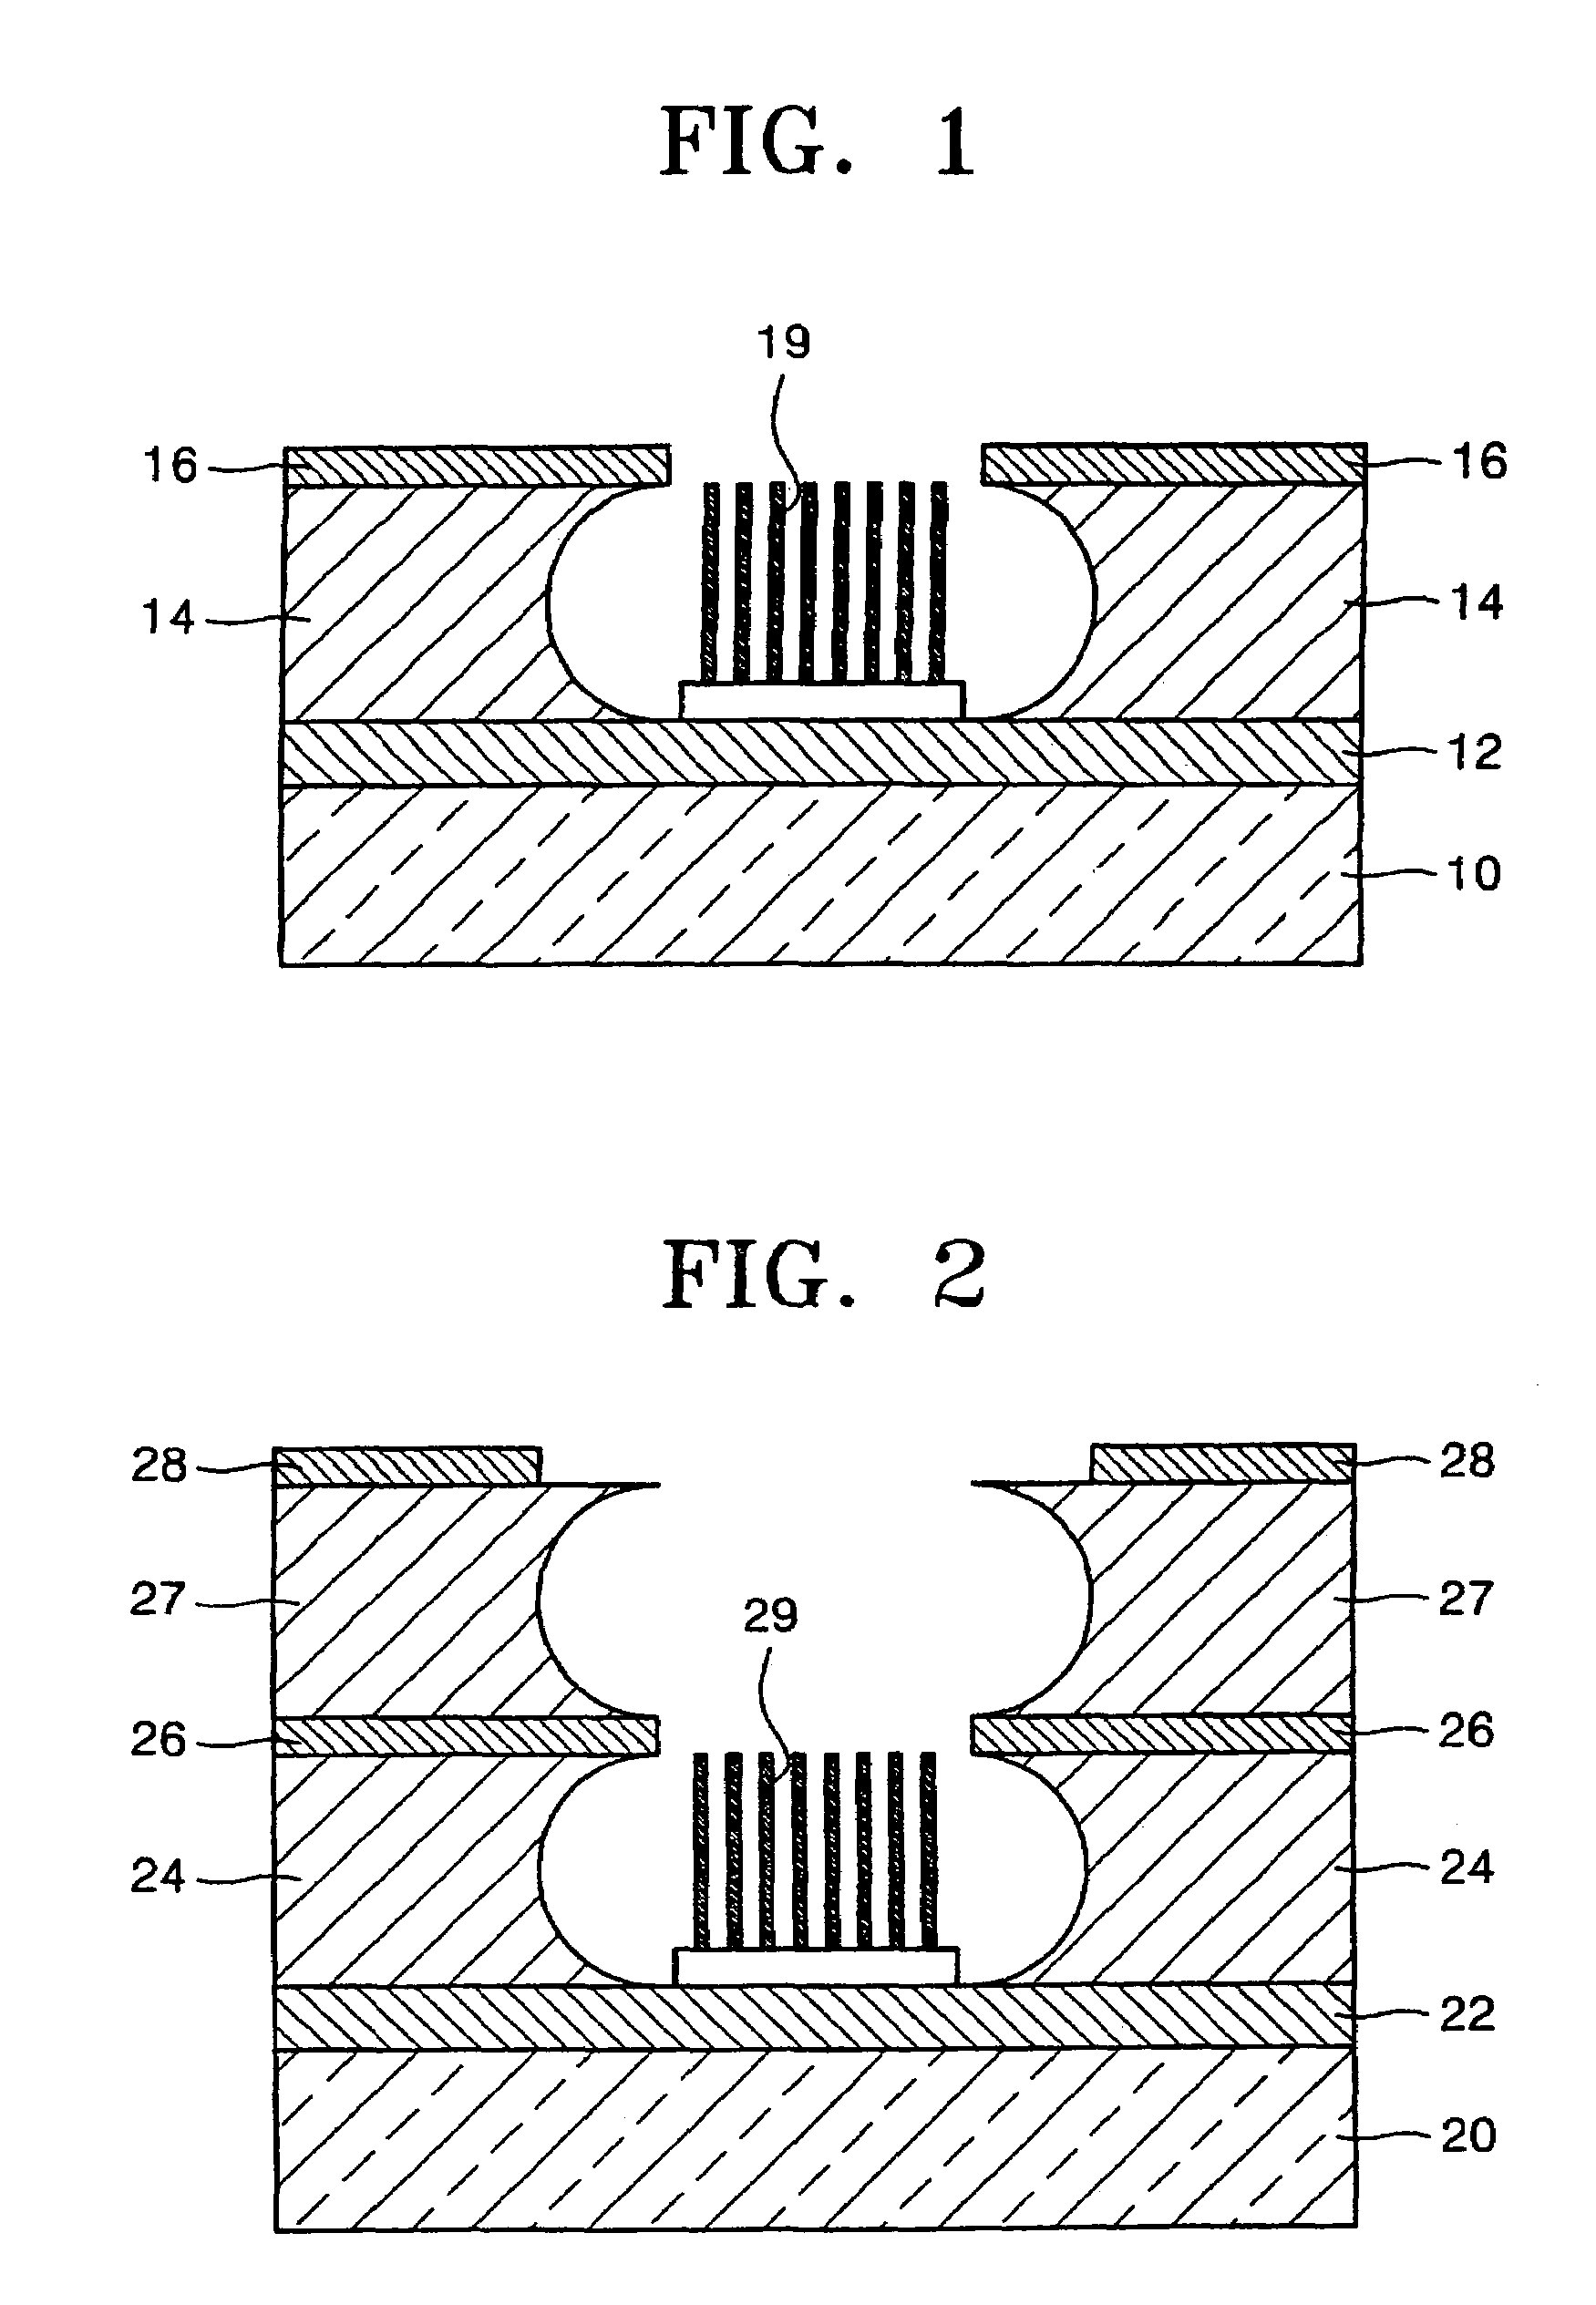 Design for a field emission display with cathode and focus electrodes on a same level